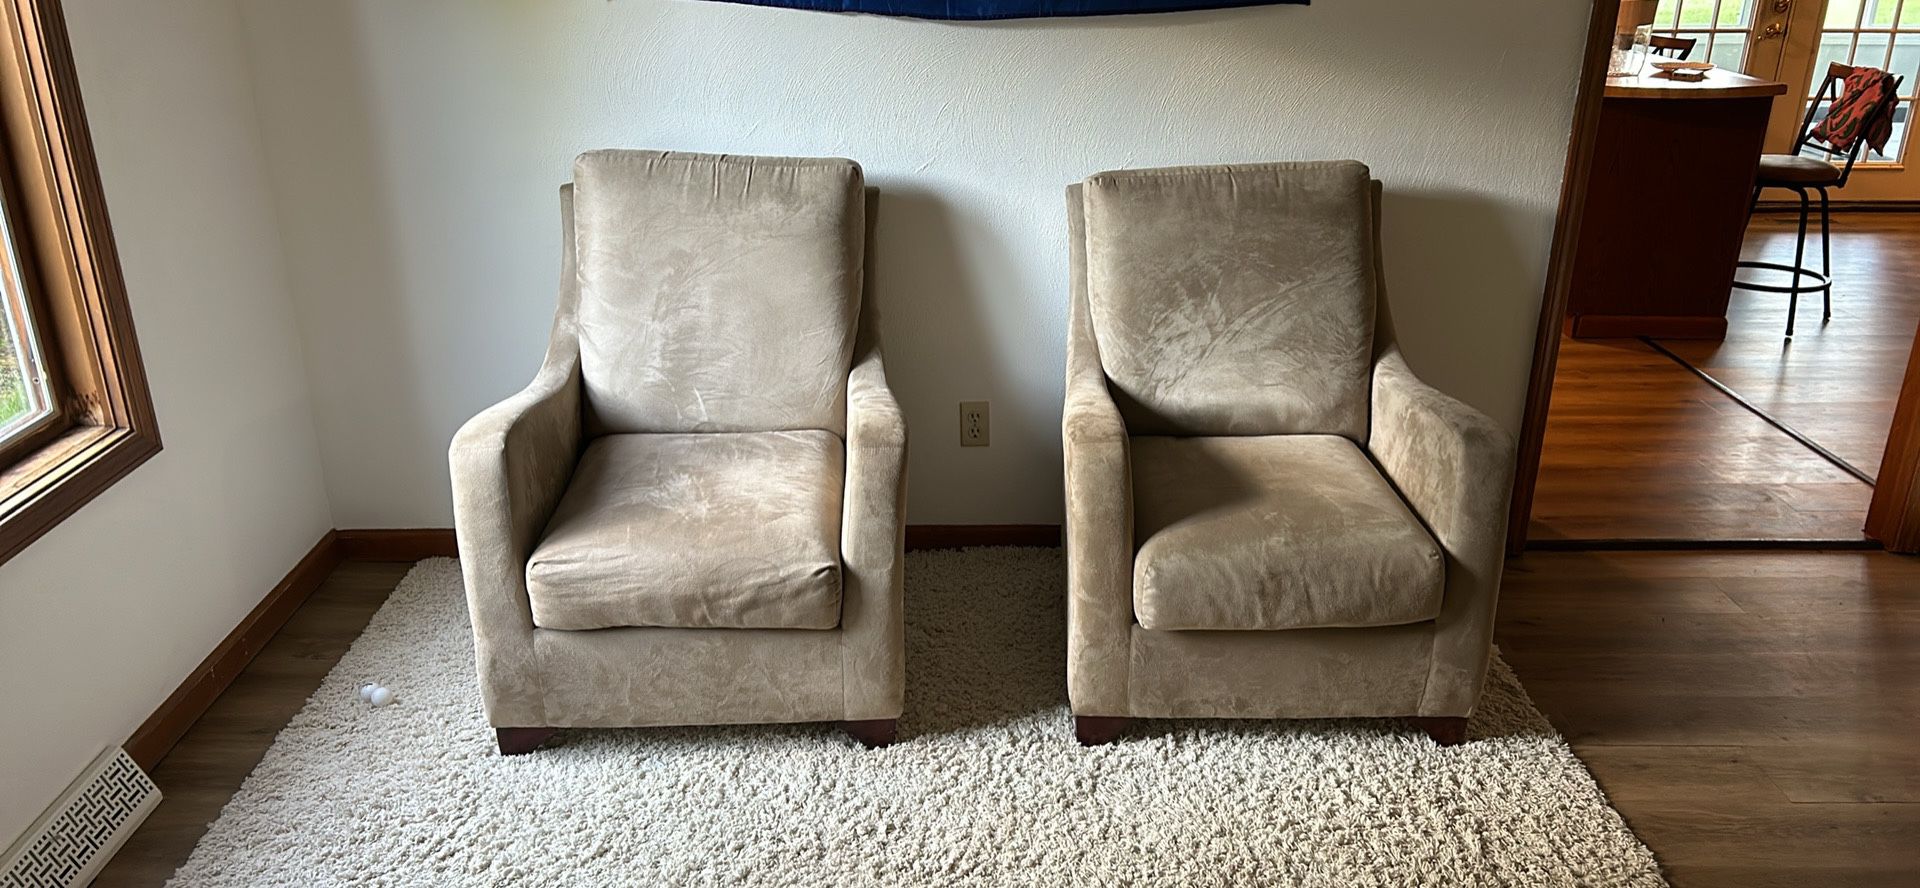 Couch Chairs